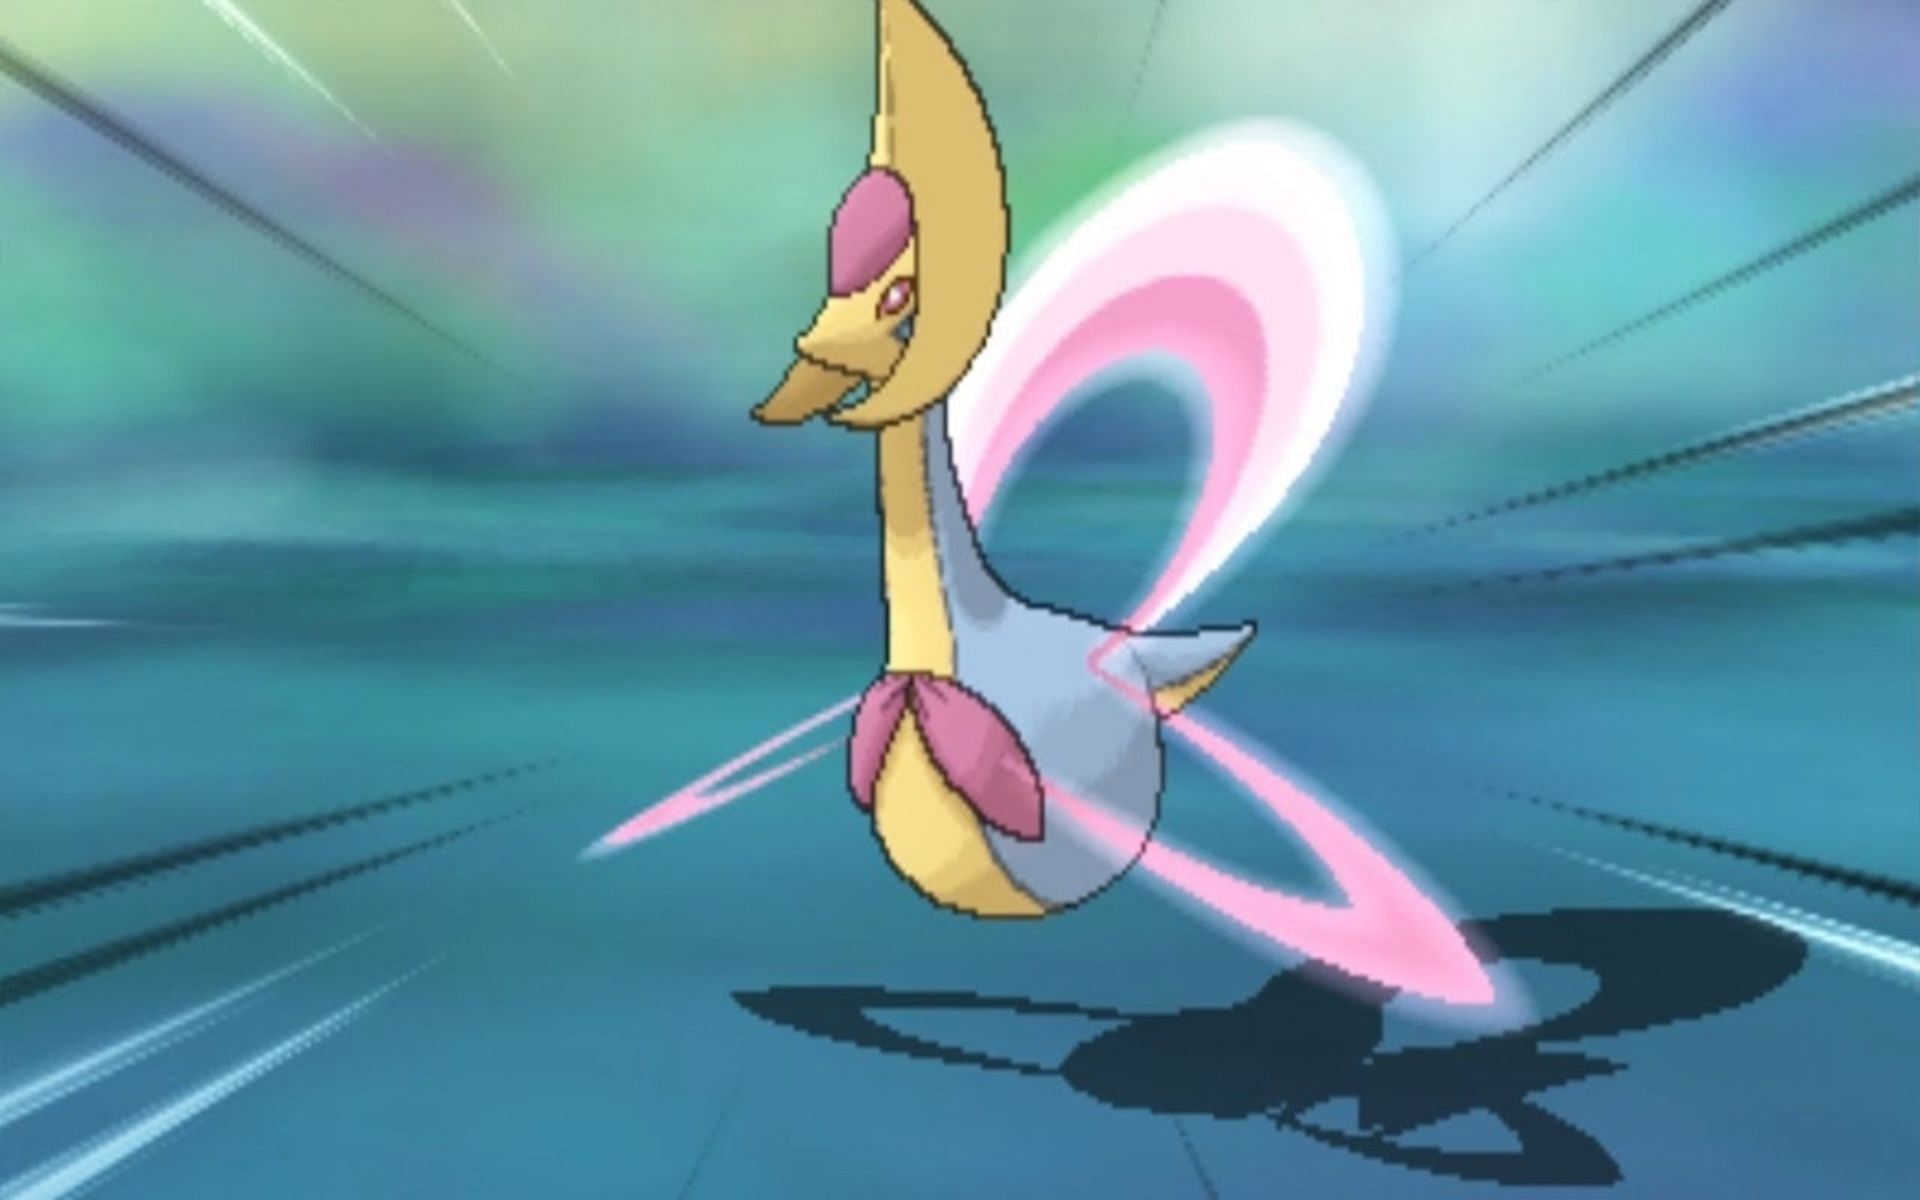 Cresselia has one of the highest Defense stats in the game (Image via Game Freak)